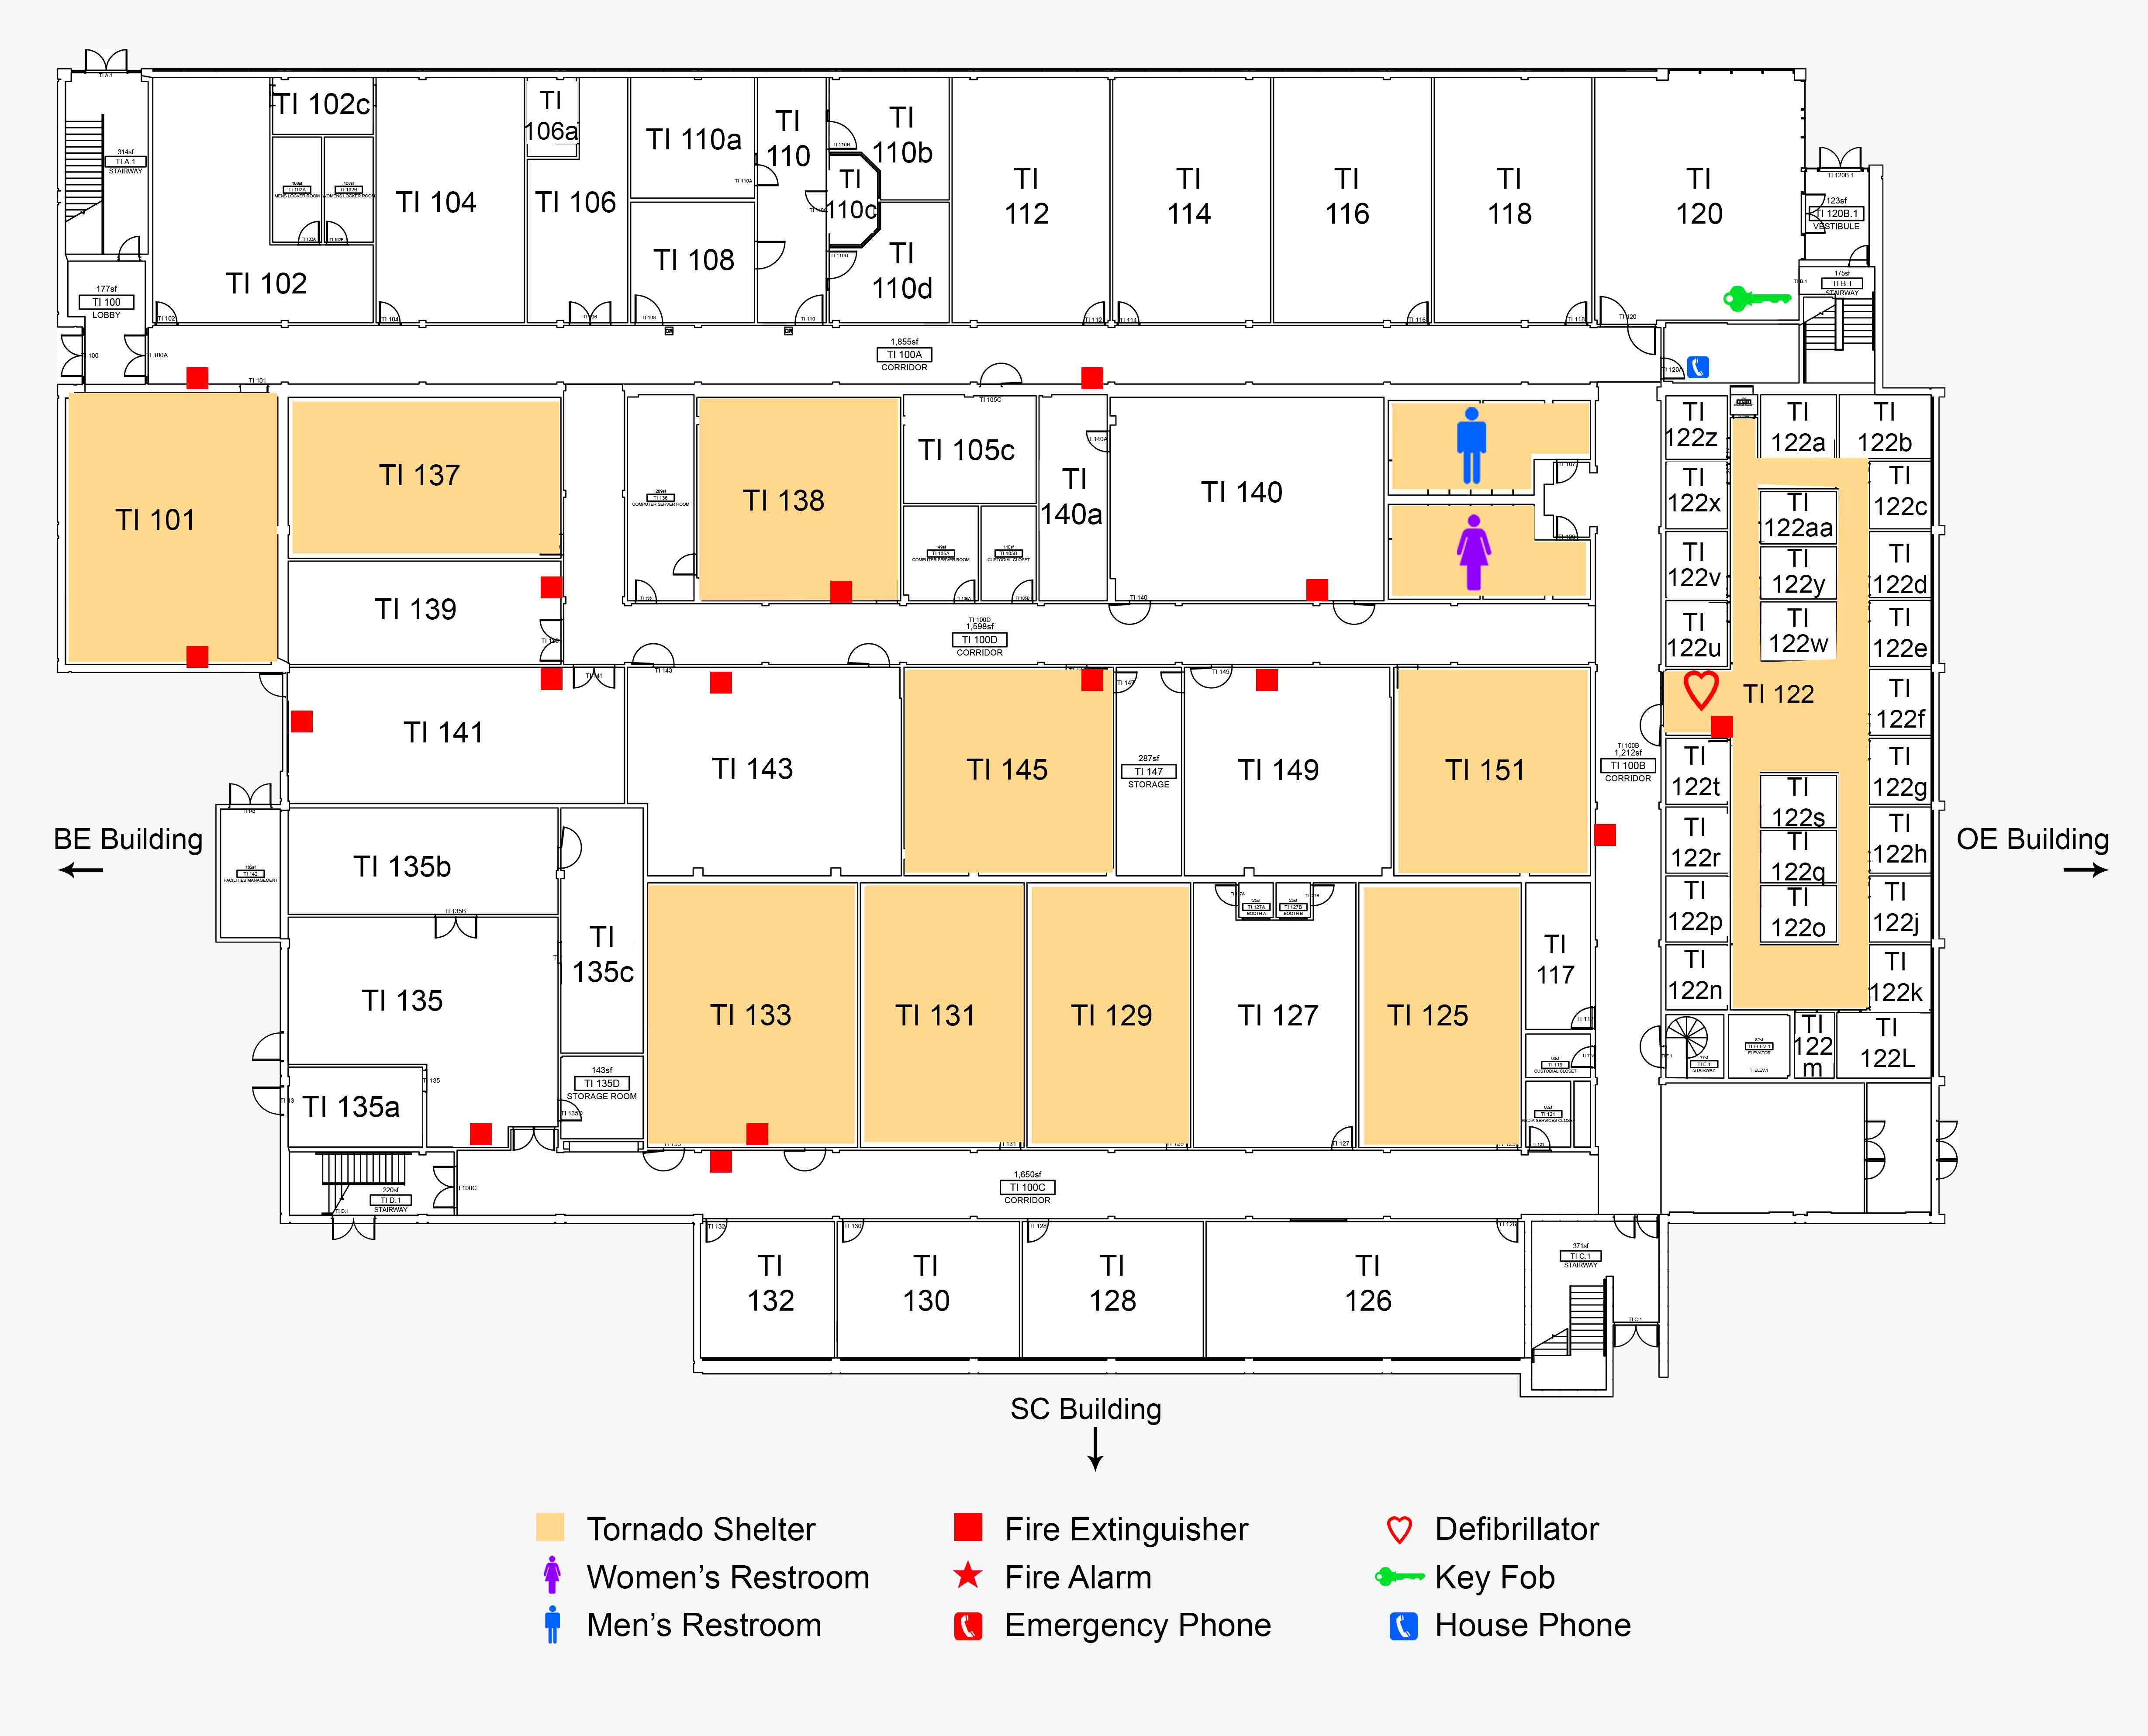 Technical and Industrial Building first floor map